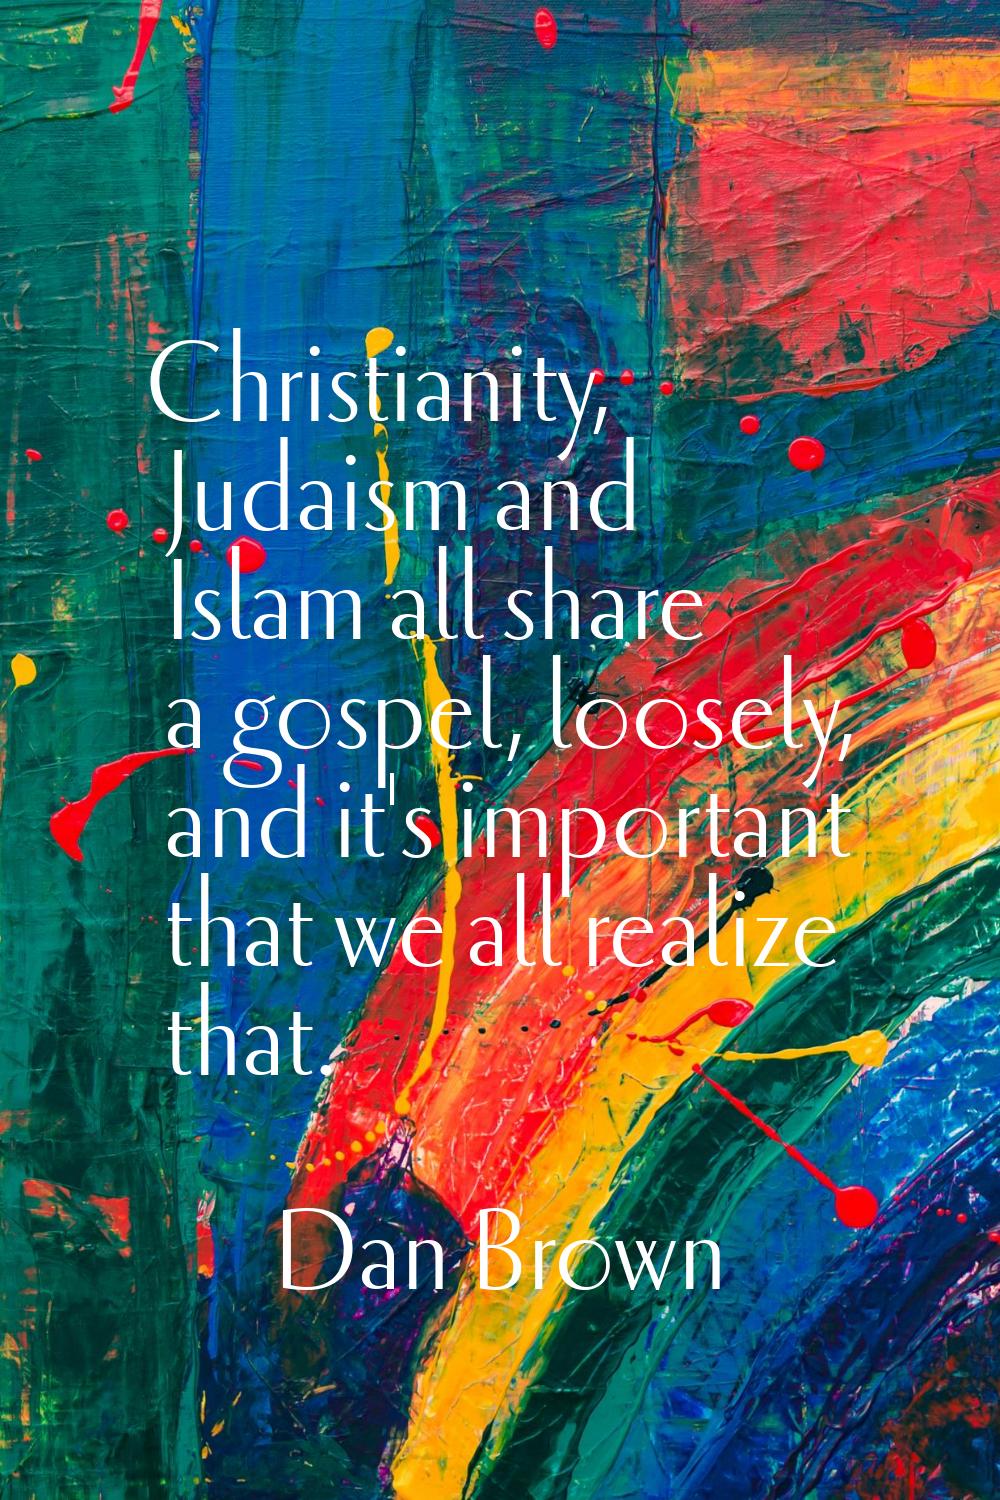 Christianity, Judaism and Islam all share a gospel, loosely, and it's important that we all realize